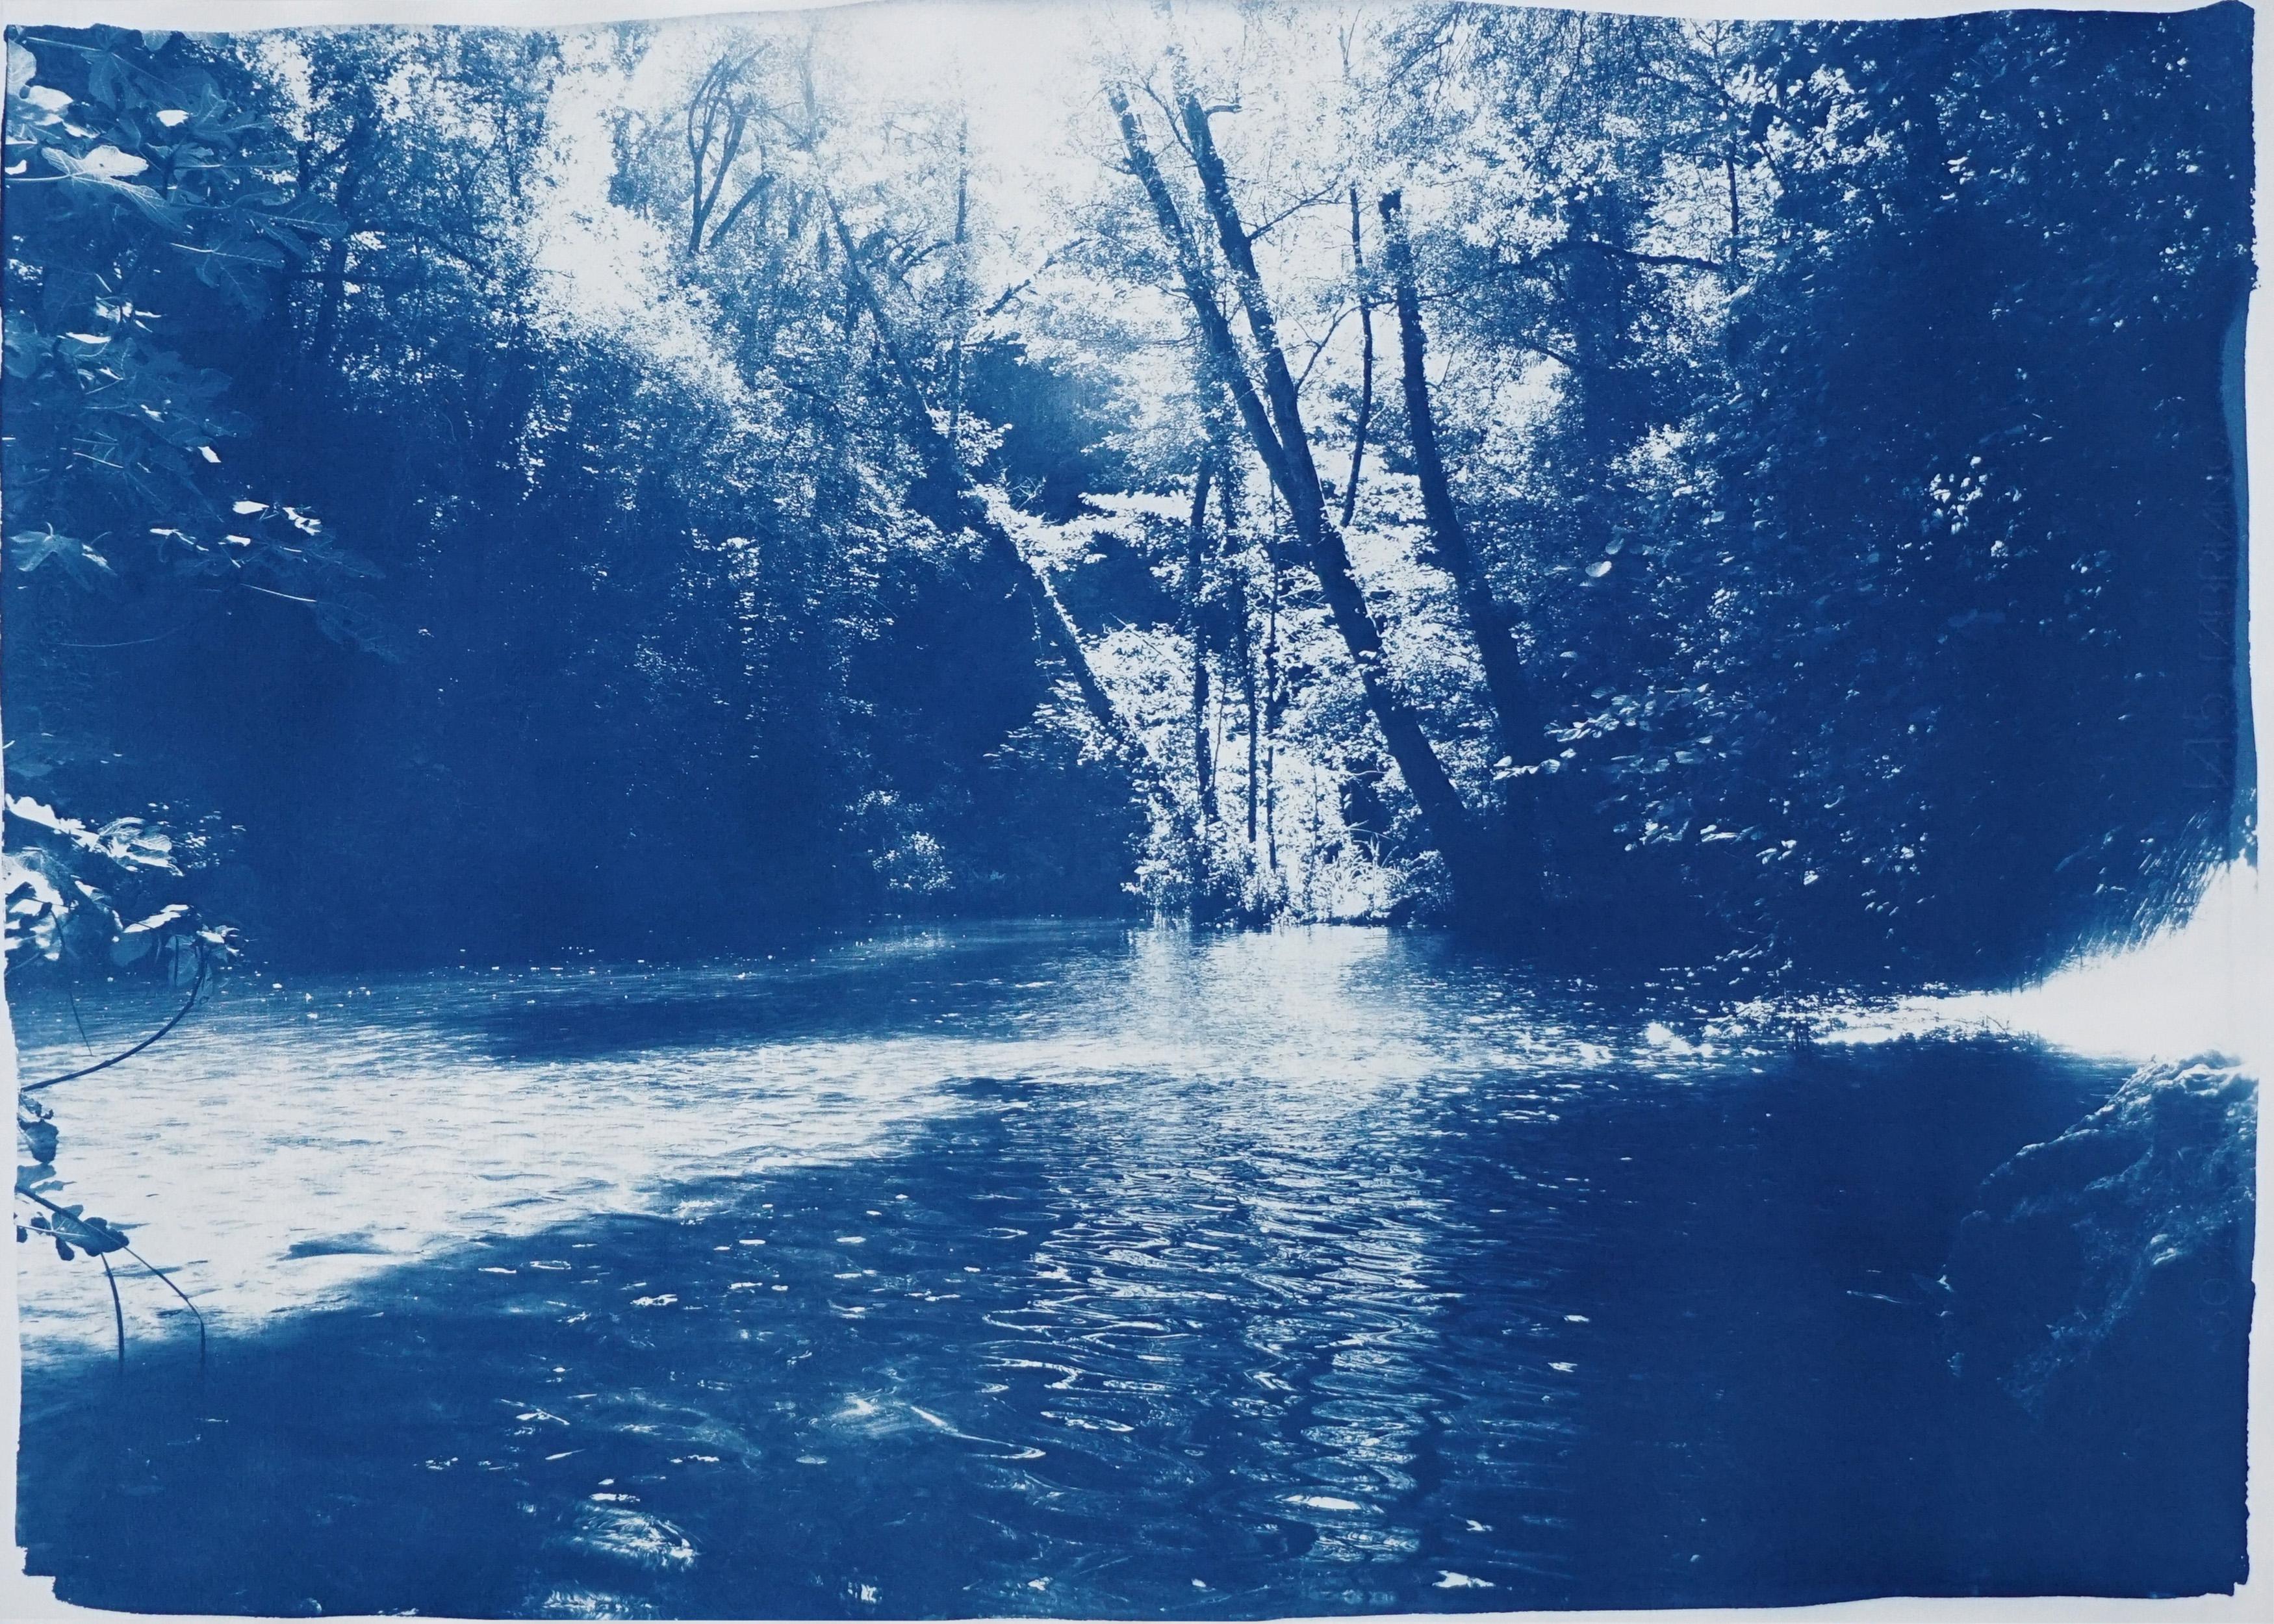 Kind of Cyan Landscape Print - Scandinavian Enchanted Forest, Cyanotype on Watercolor Paper, Limited Edition